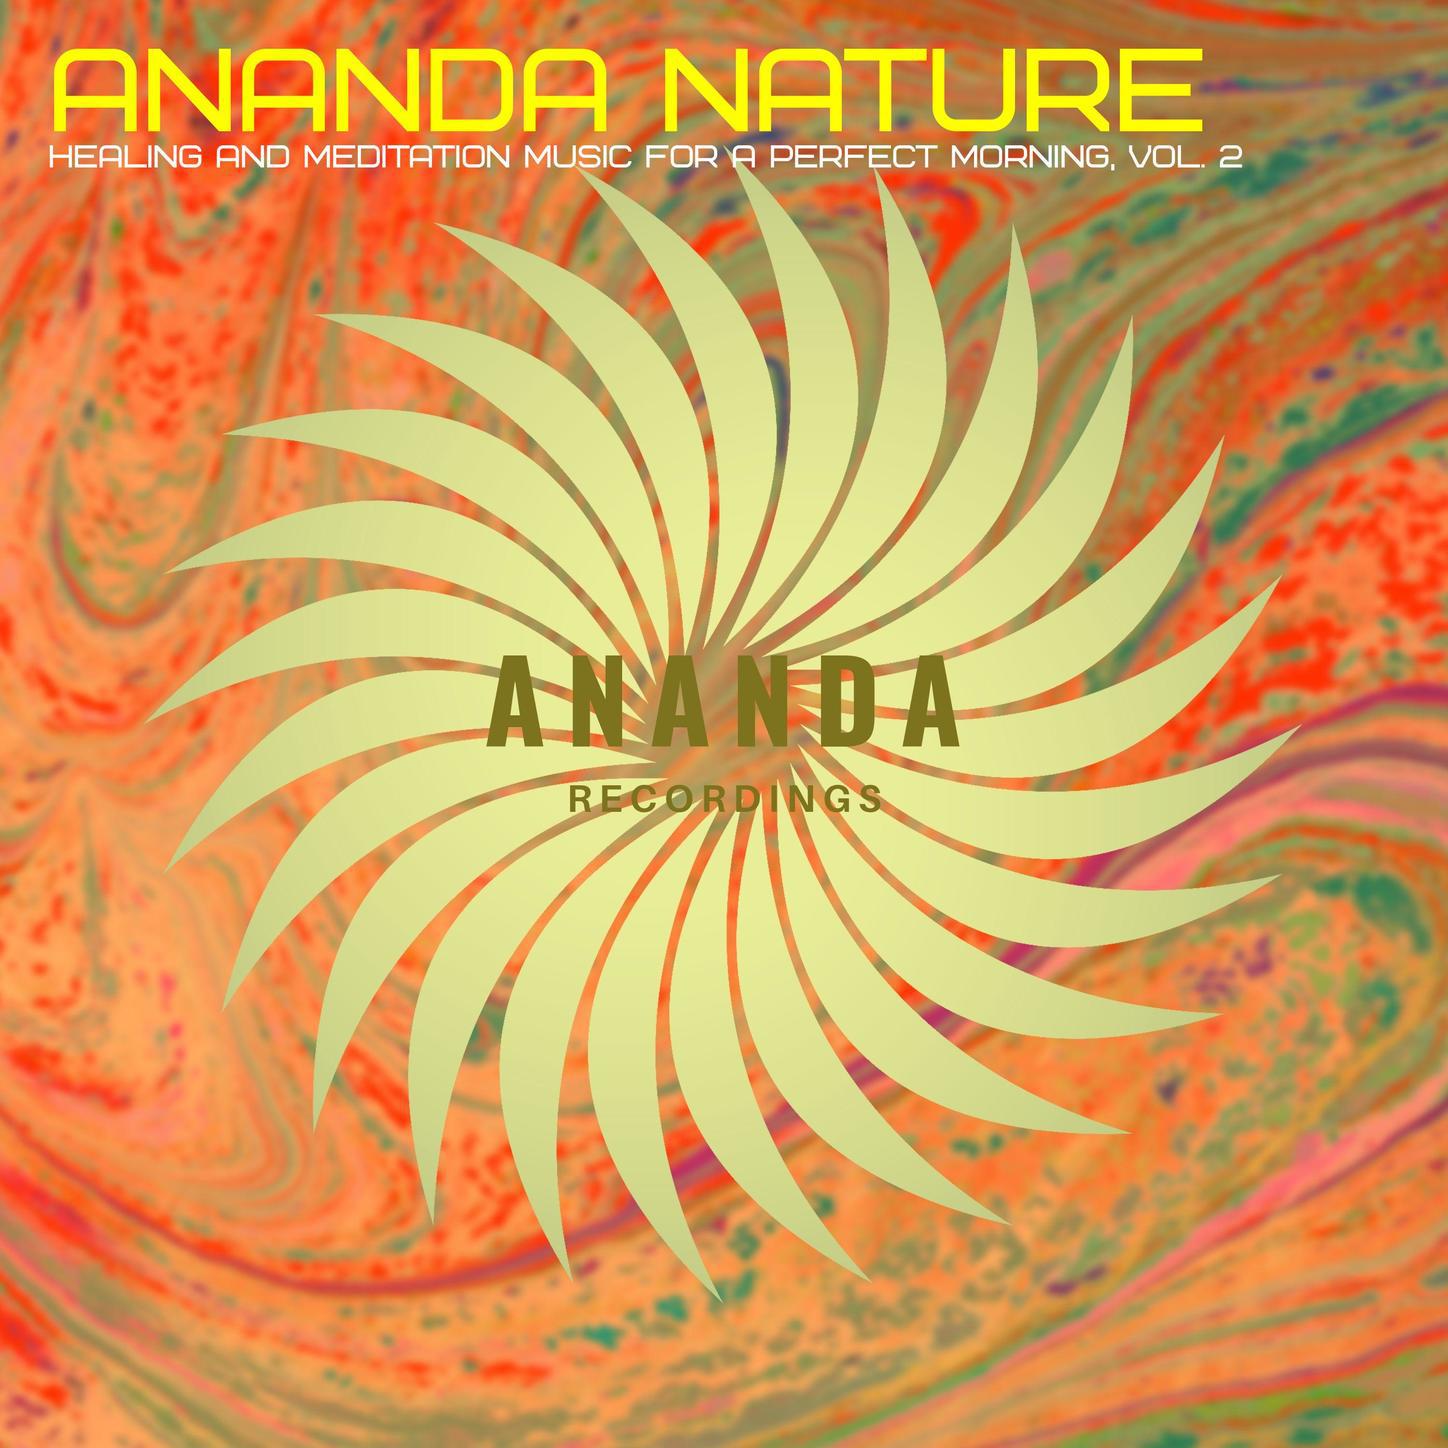 Ananda Nature : Healing and Meditation Music for a Perfect Morning, Vol. 2